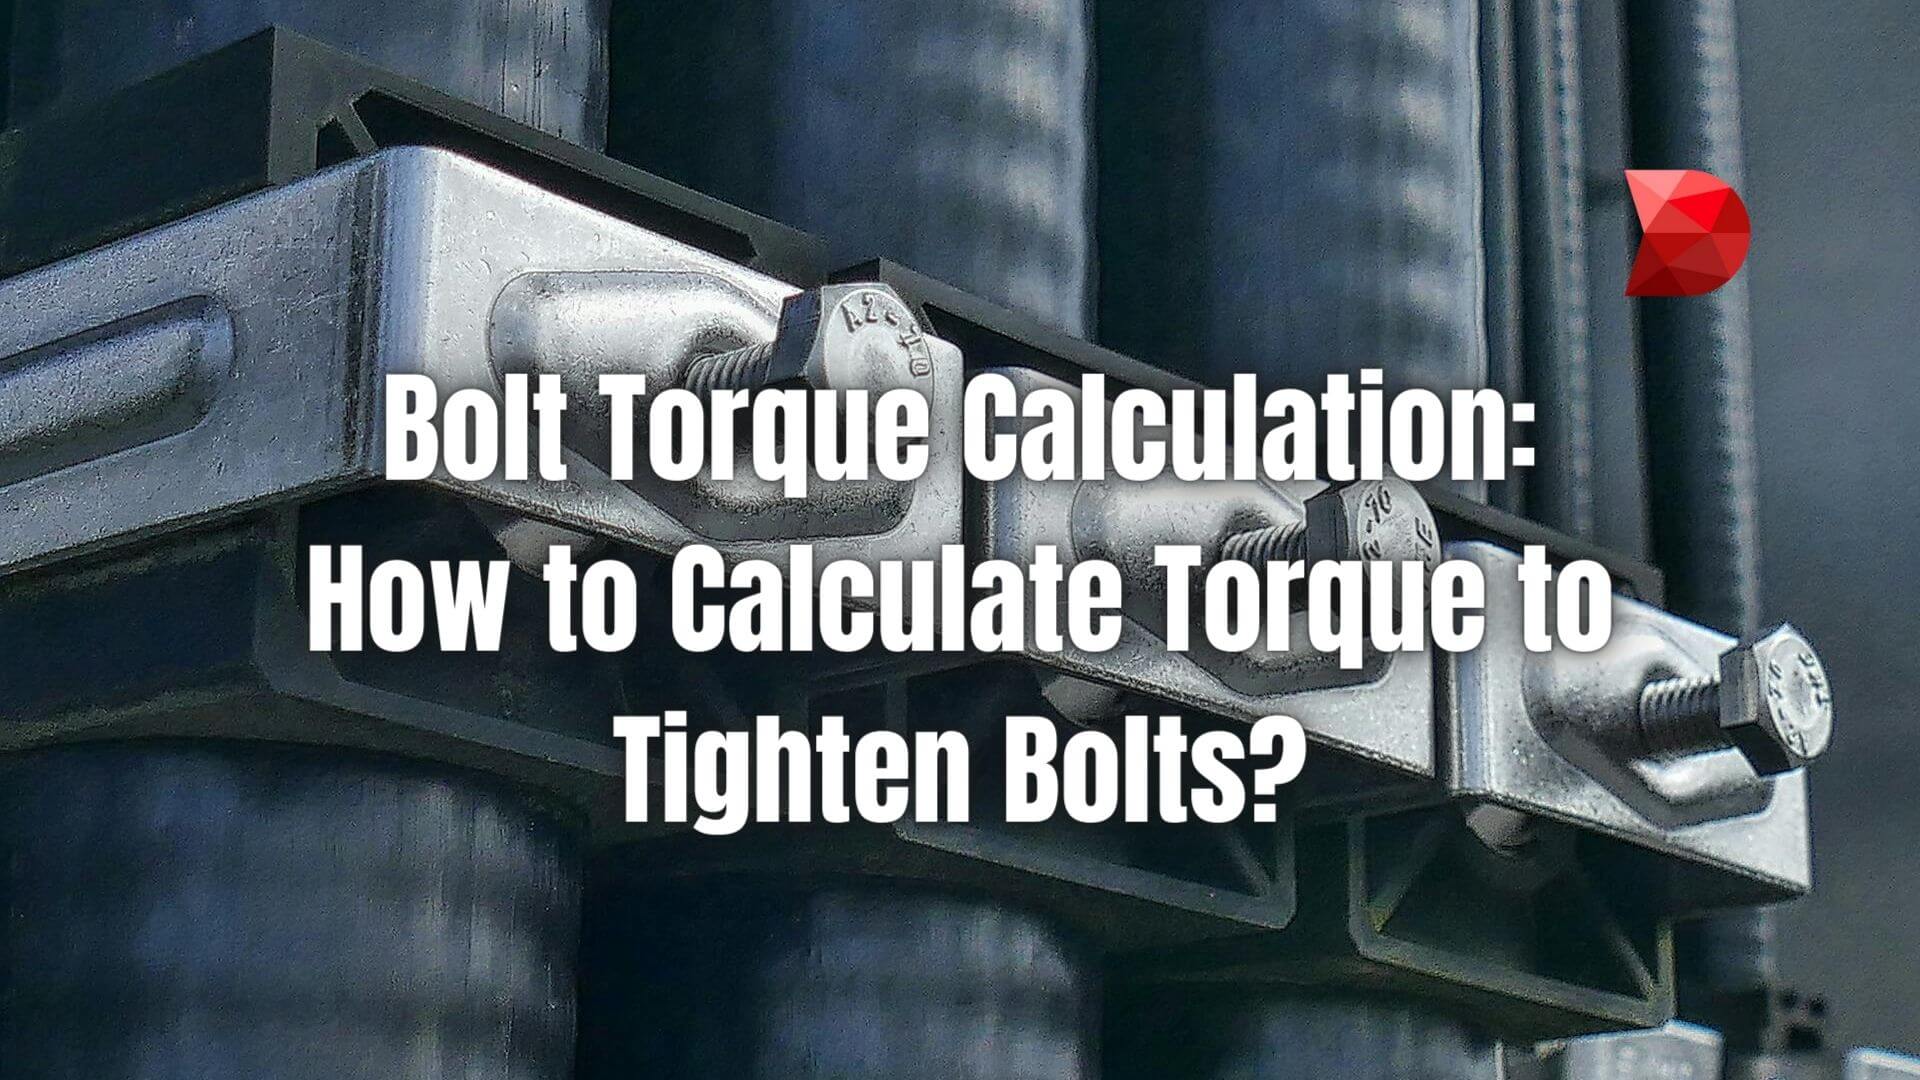 Master bolt torque calculations with our comprehensive guide. Click here to learn how to tighten bolts accurately for optimal performance.